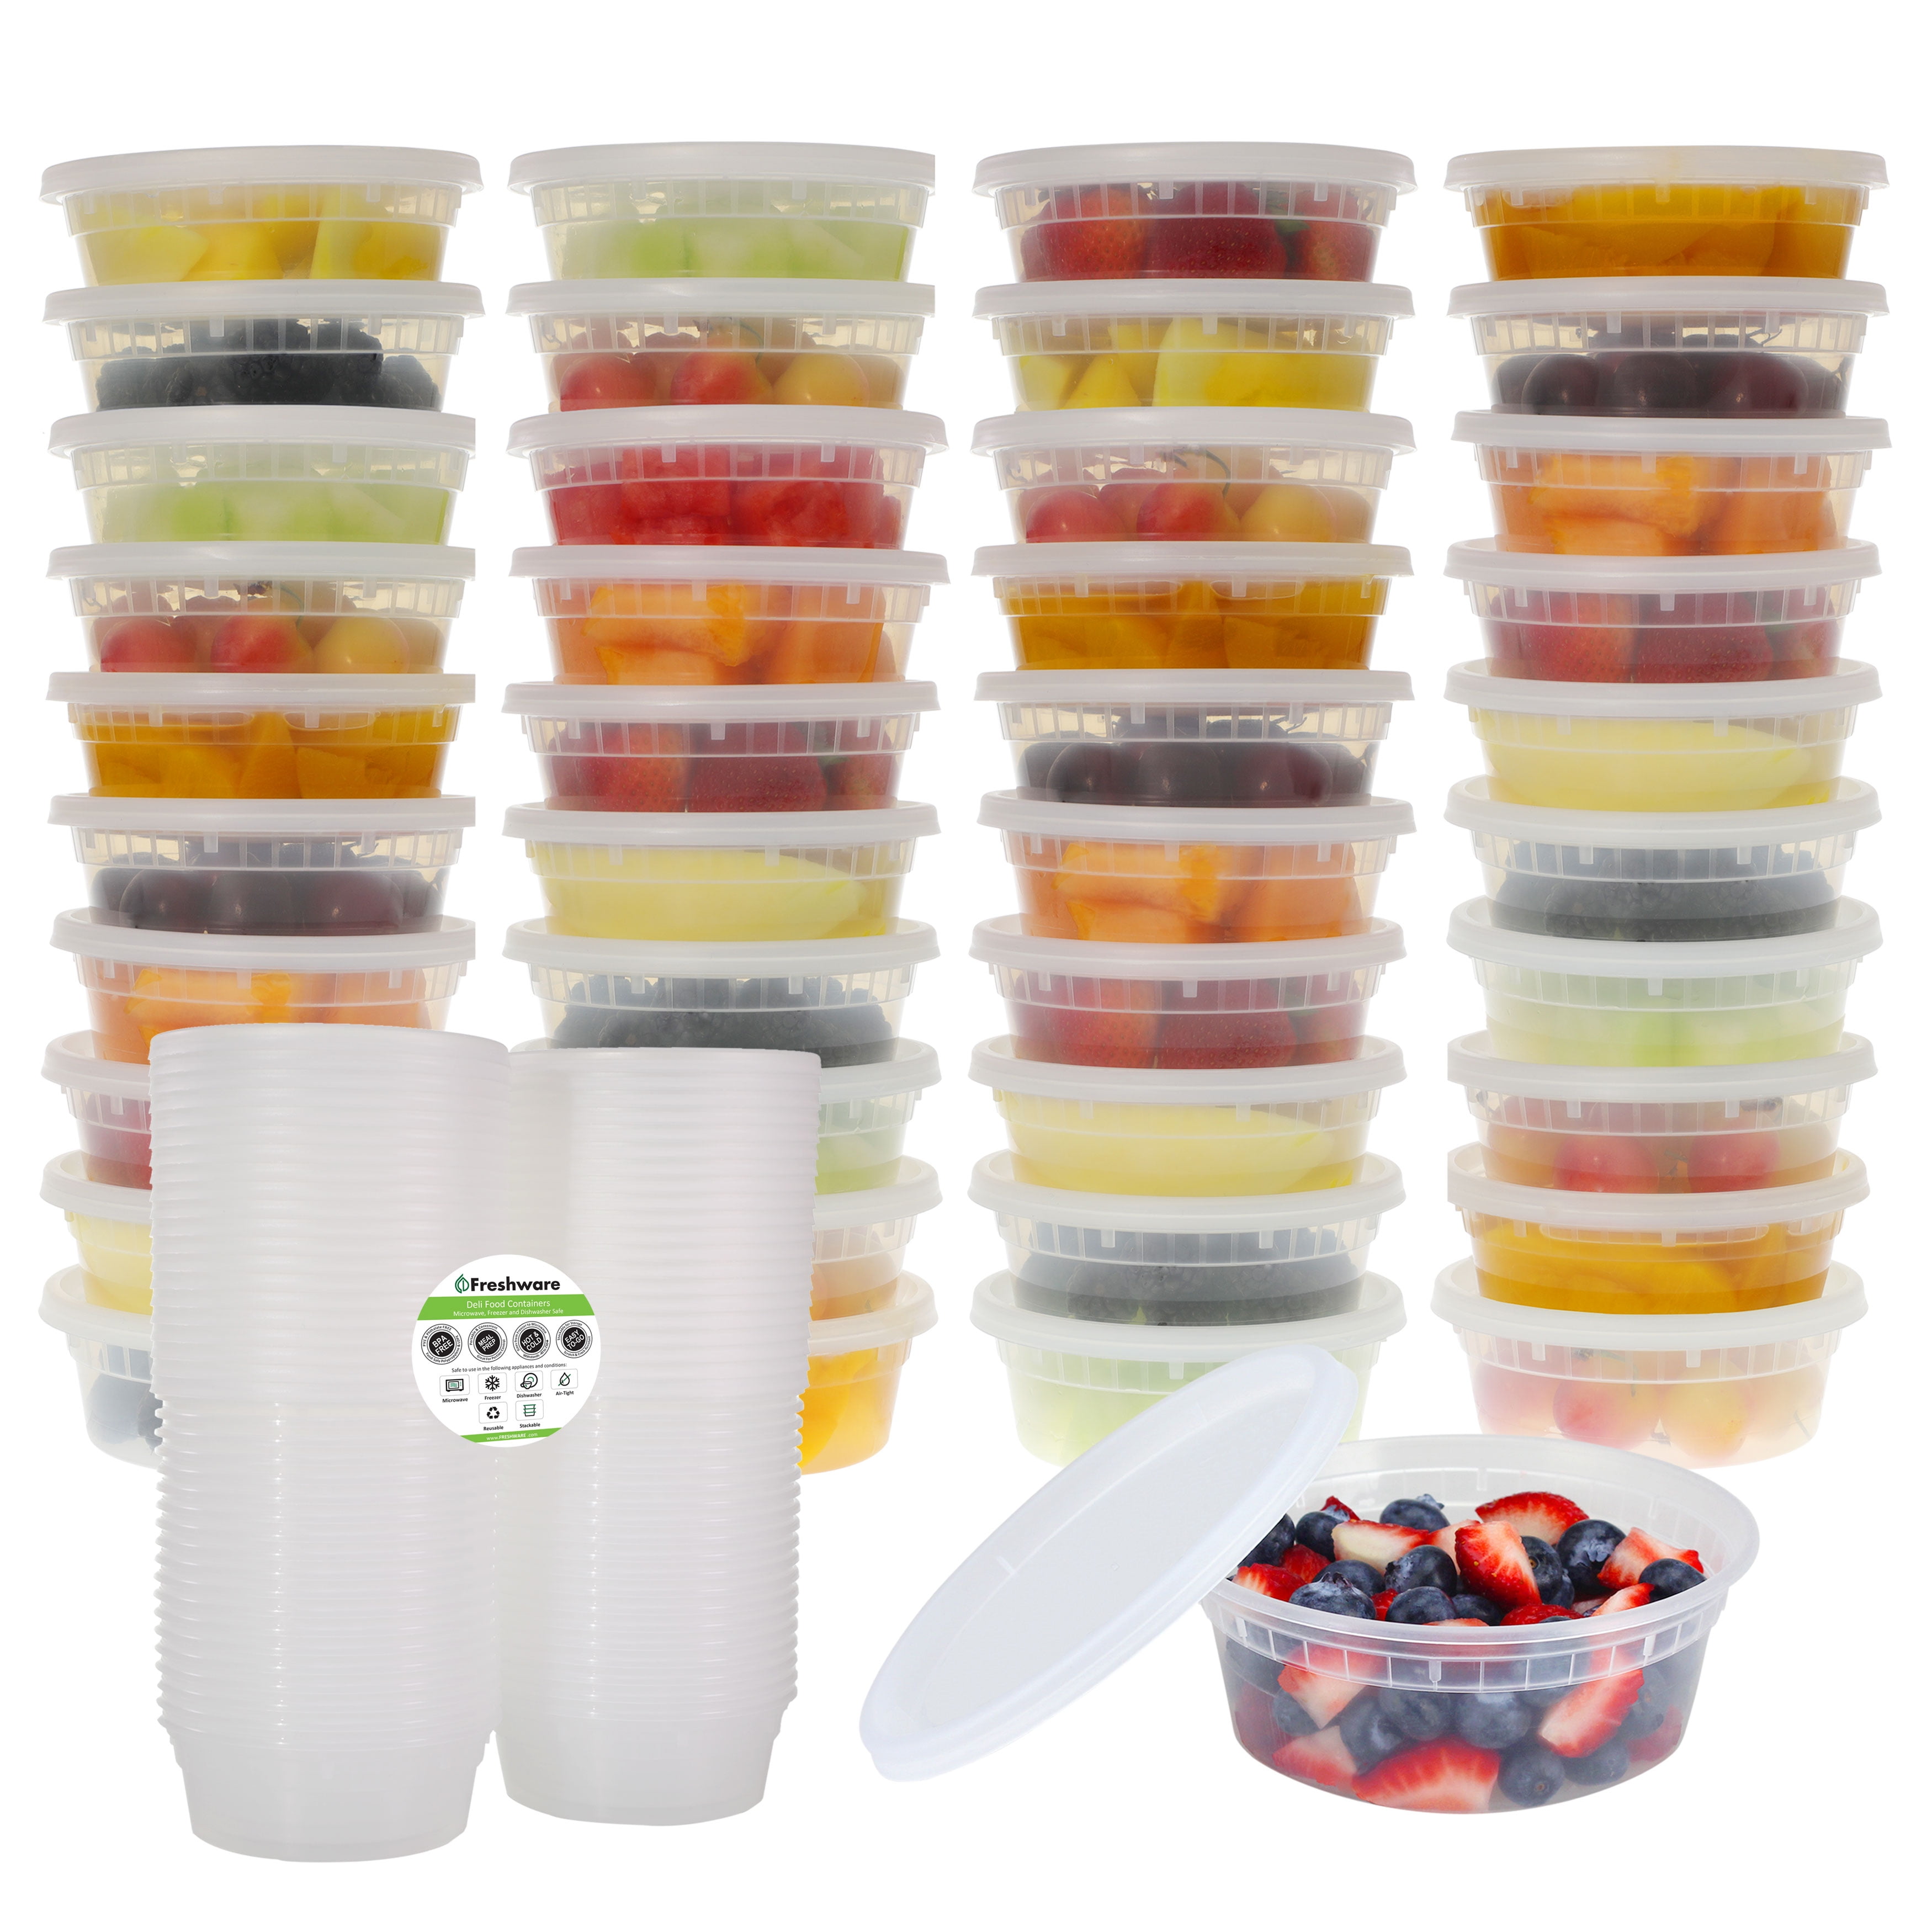 Food Containers Plastic Takeaway Microwave Freezer Safe Storage Boxes W Lids 